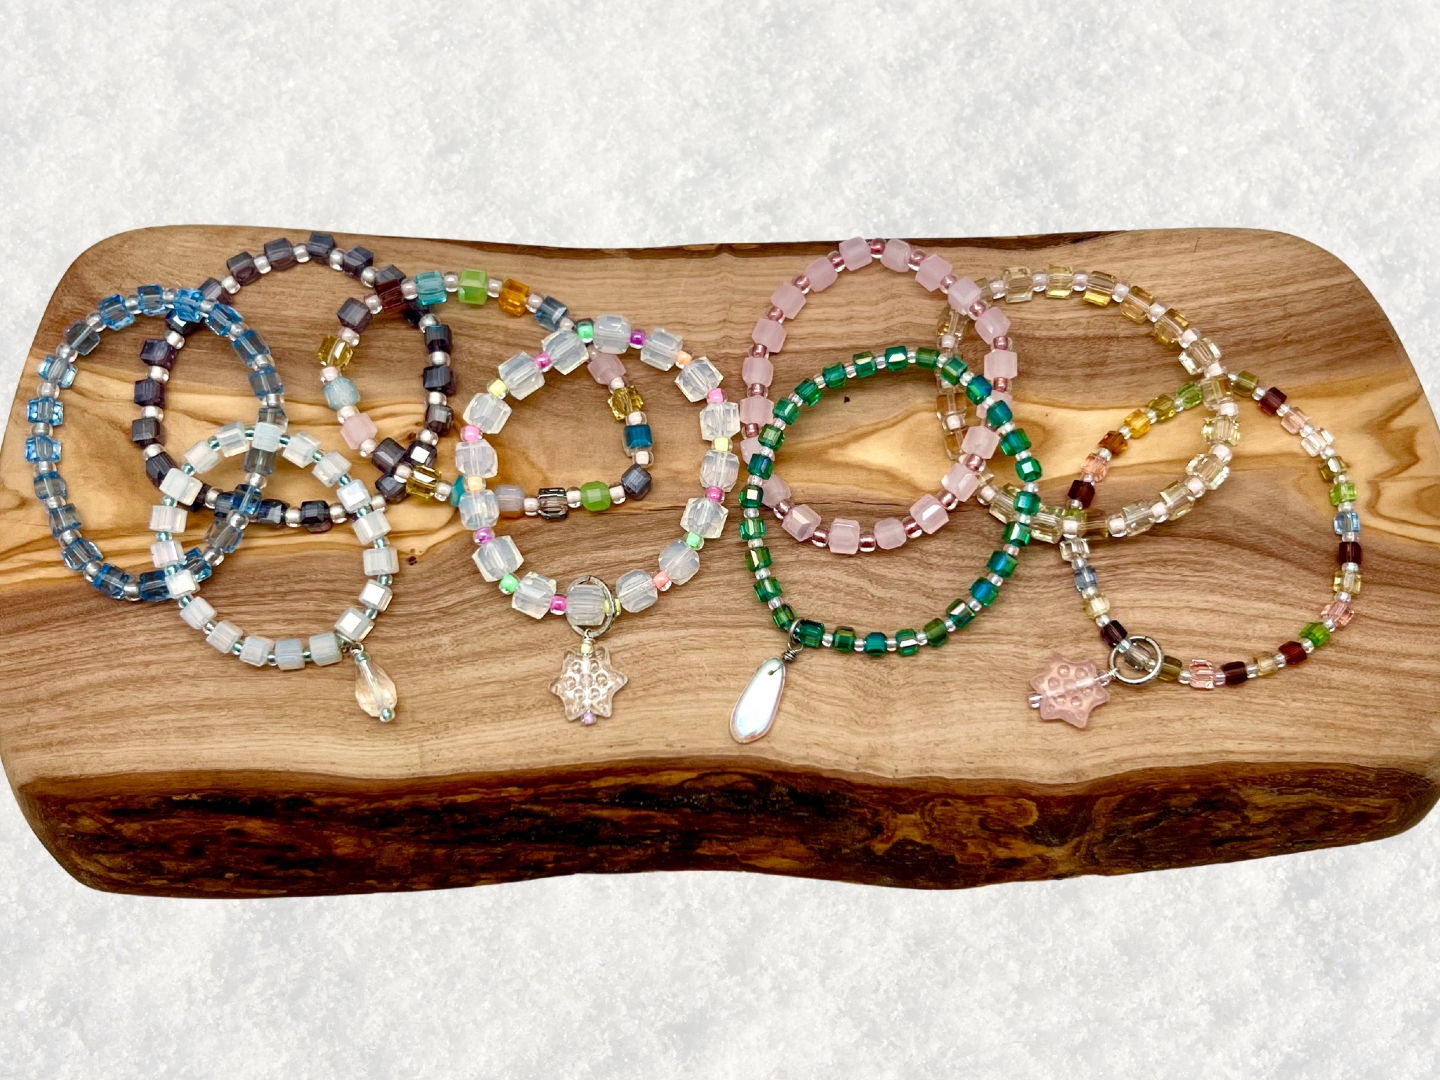 Photo of several bracelets on a wooden surface set on snow.